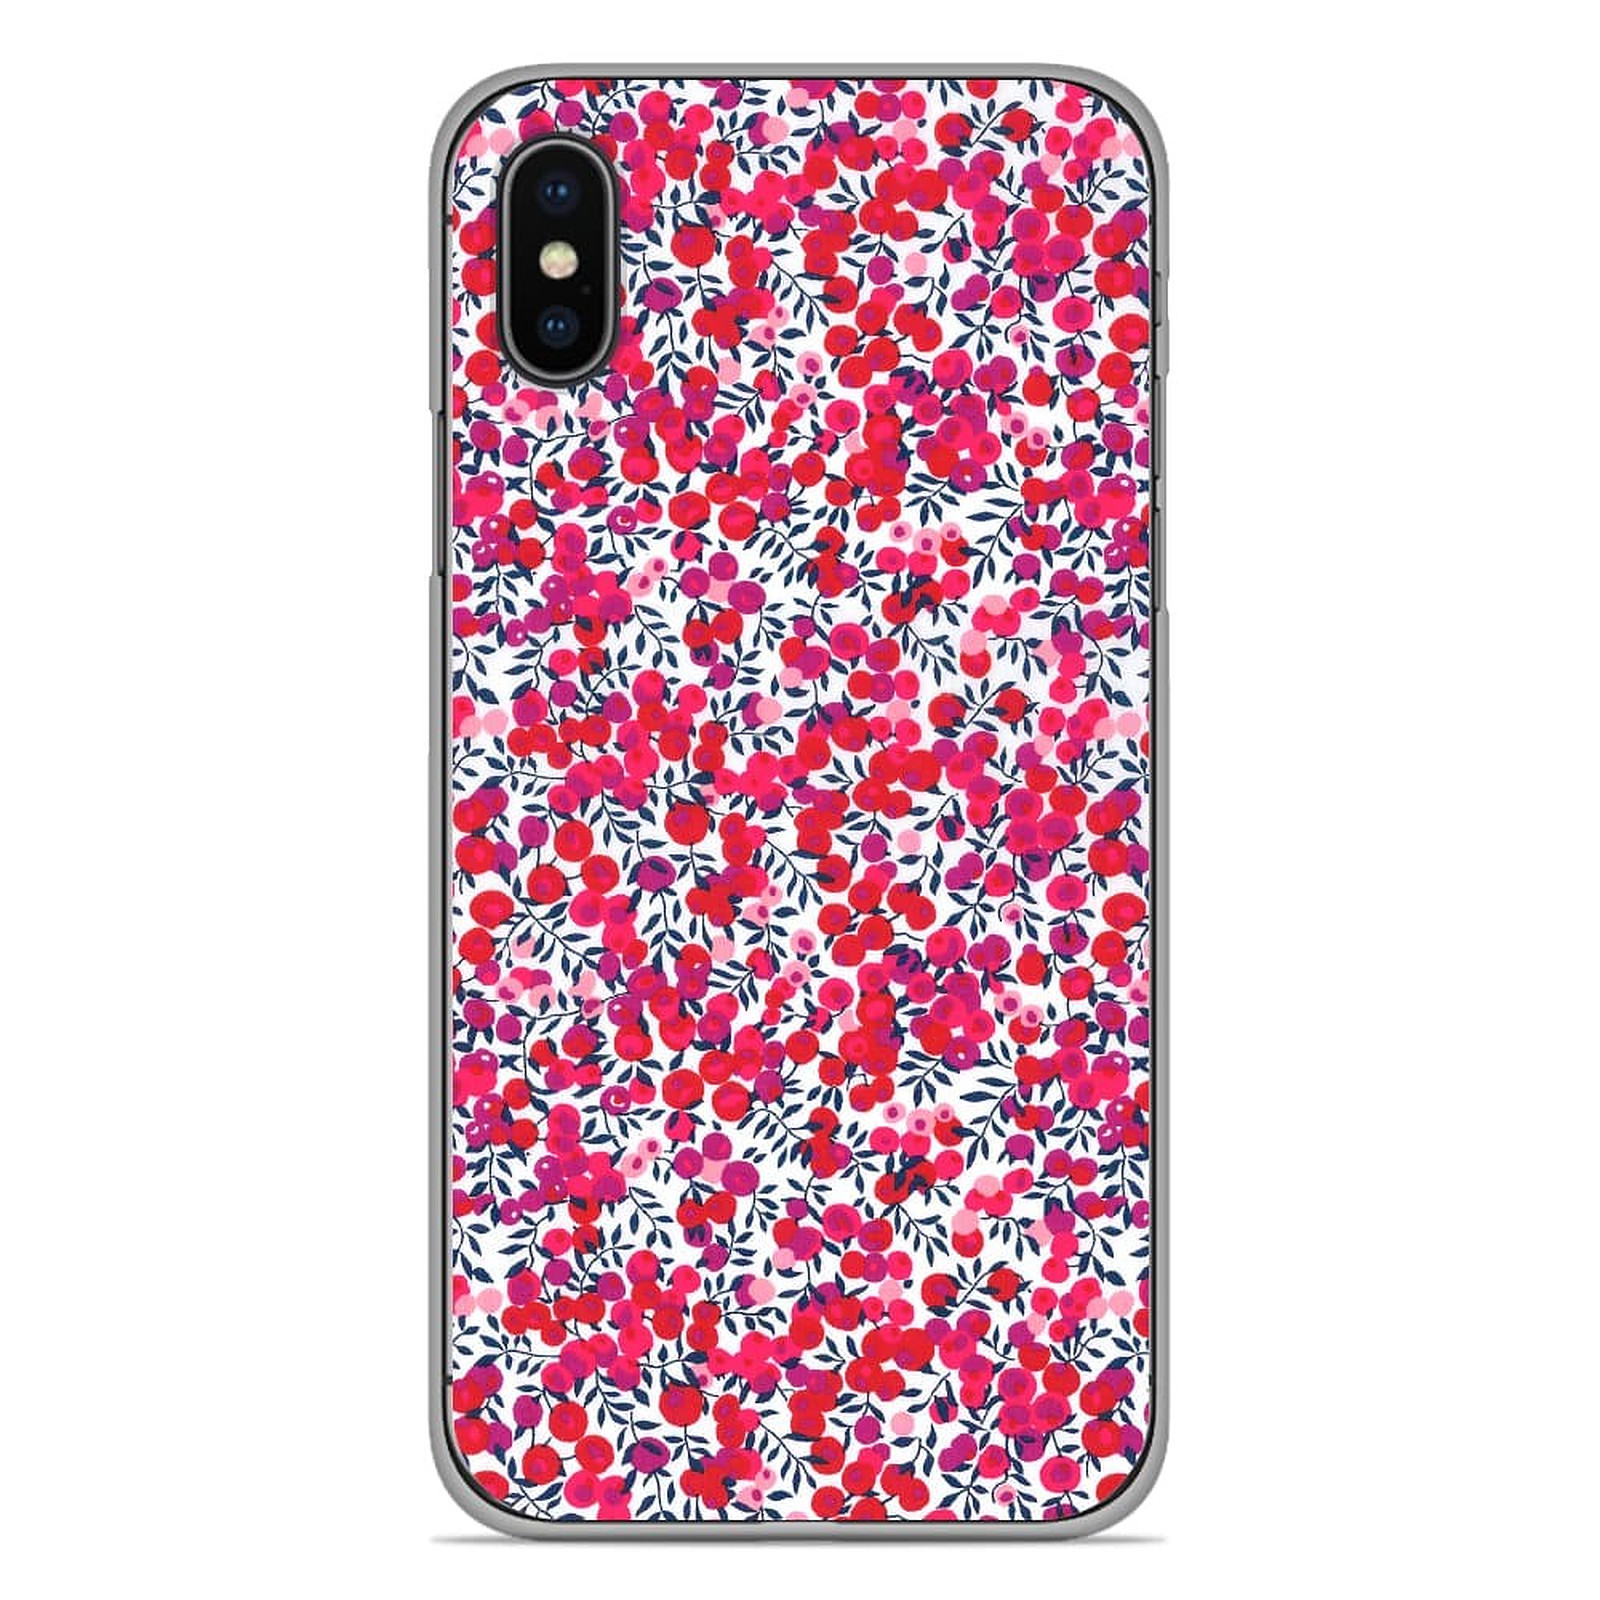 1001 Coques Coque silicone gel Apple iPhone X / XS motif Liberty Wiltshire Rouge - Coque telephone 1001Coques